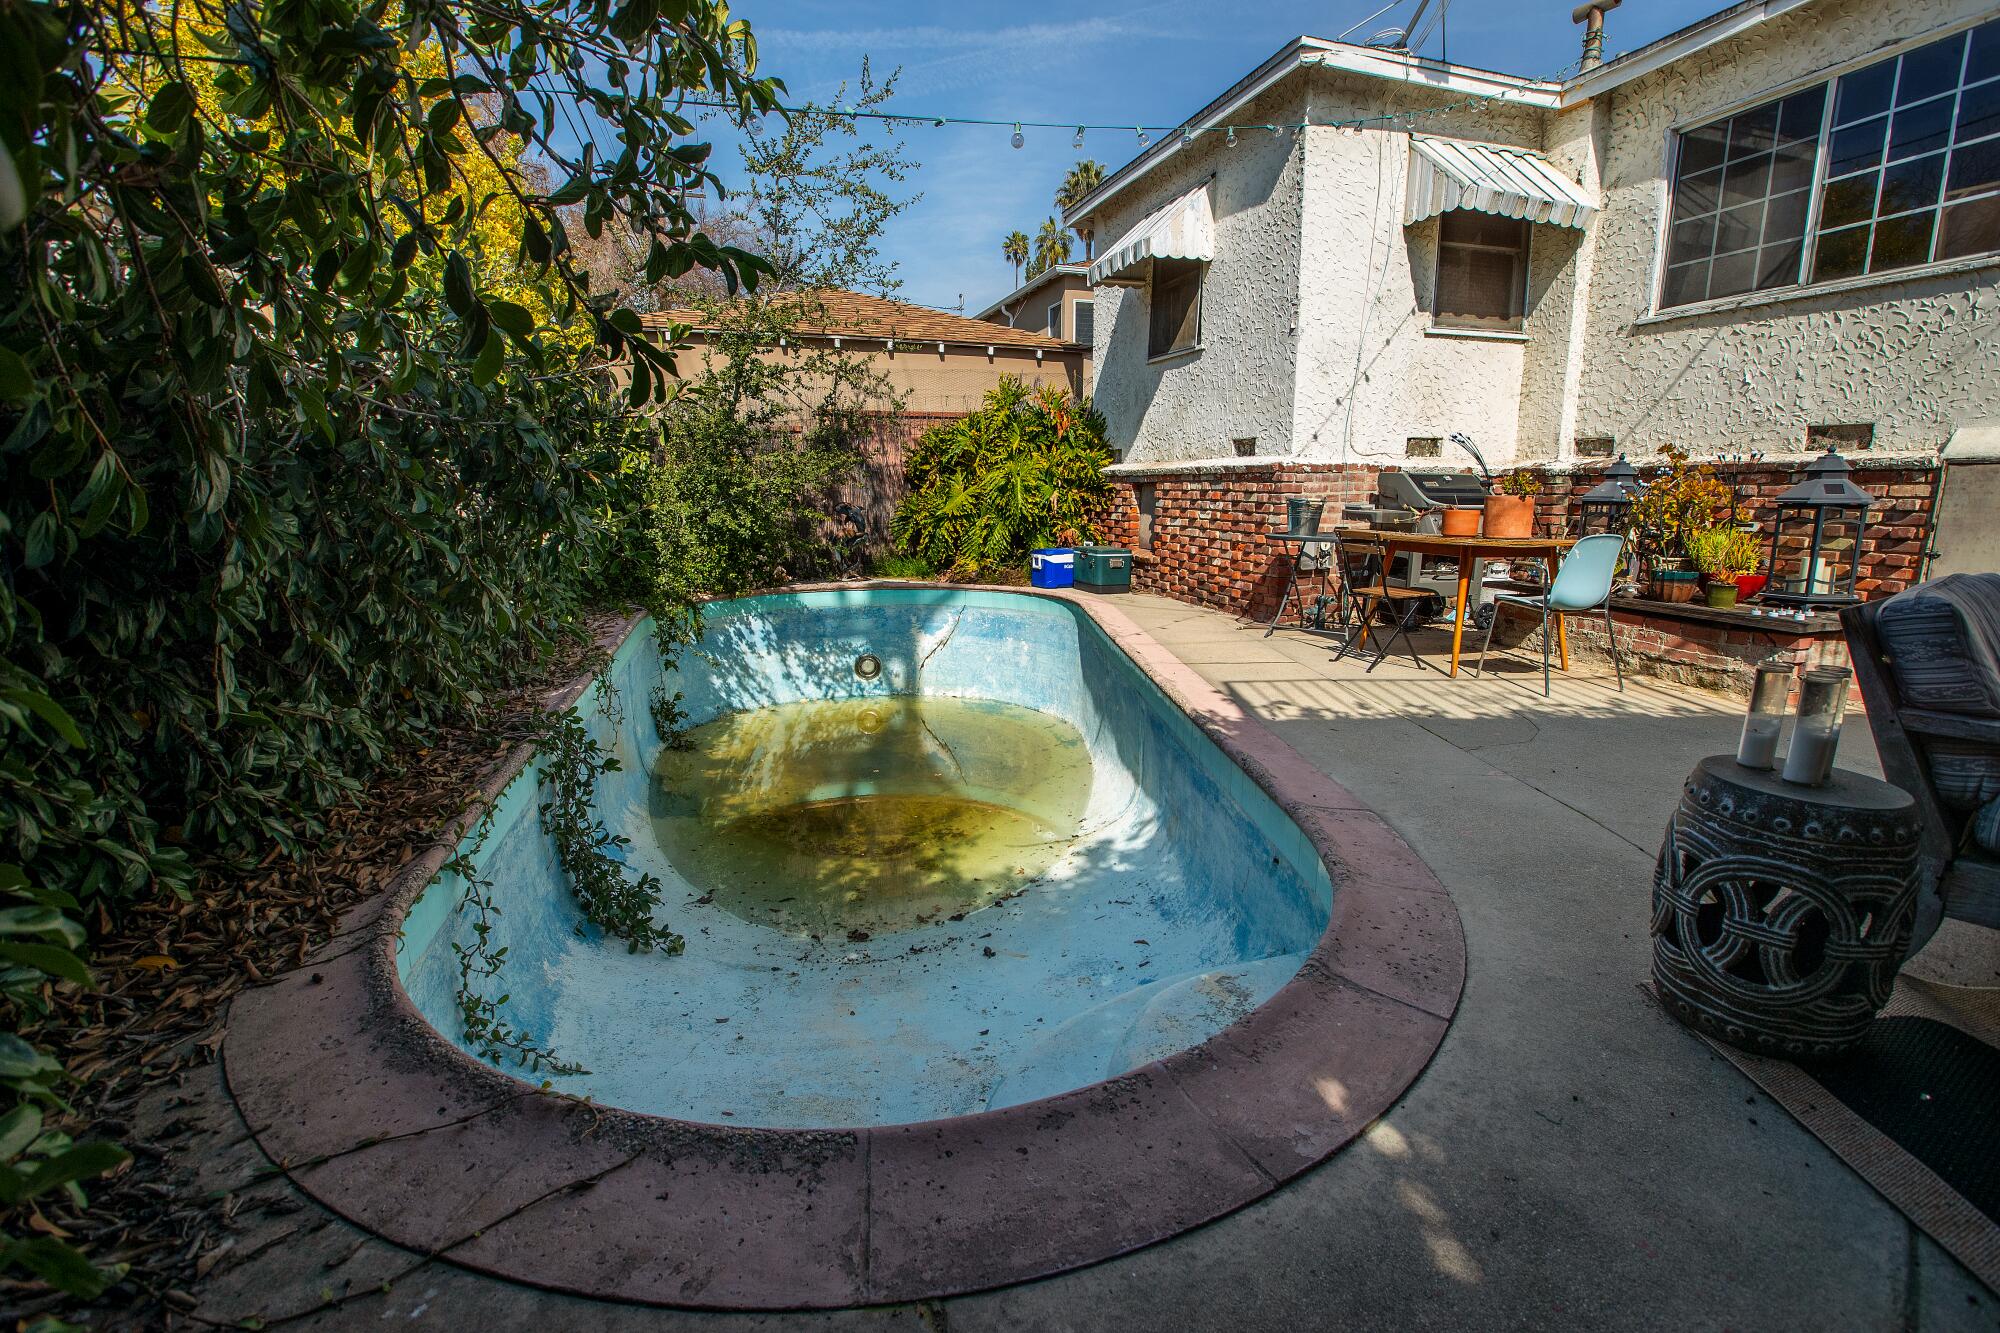 A patio outside a house with an emptied pool